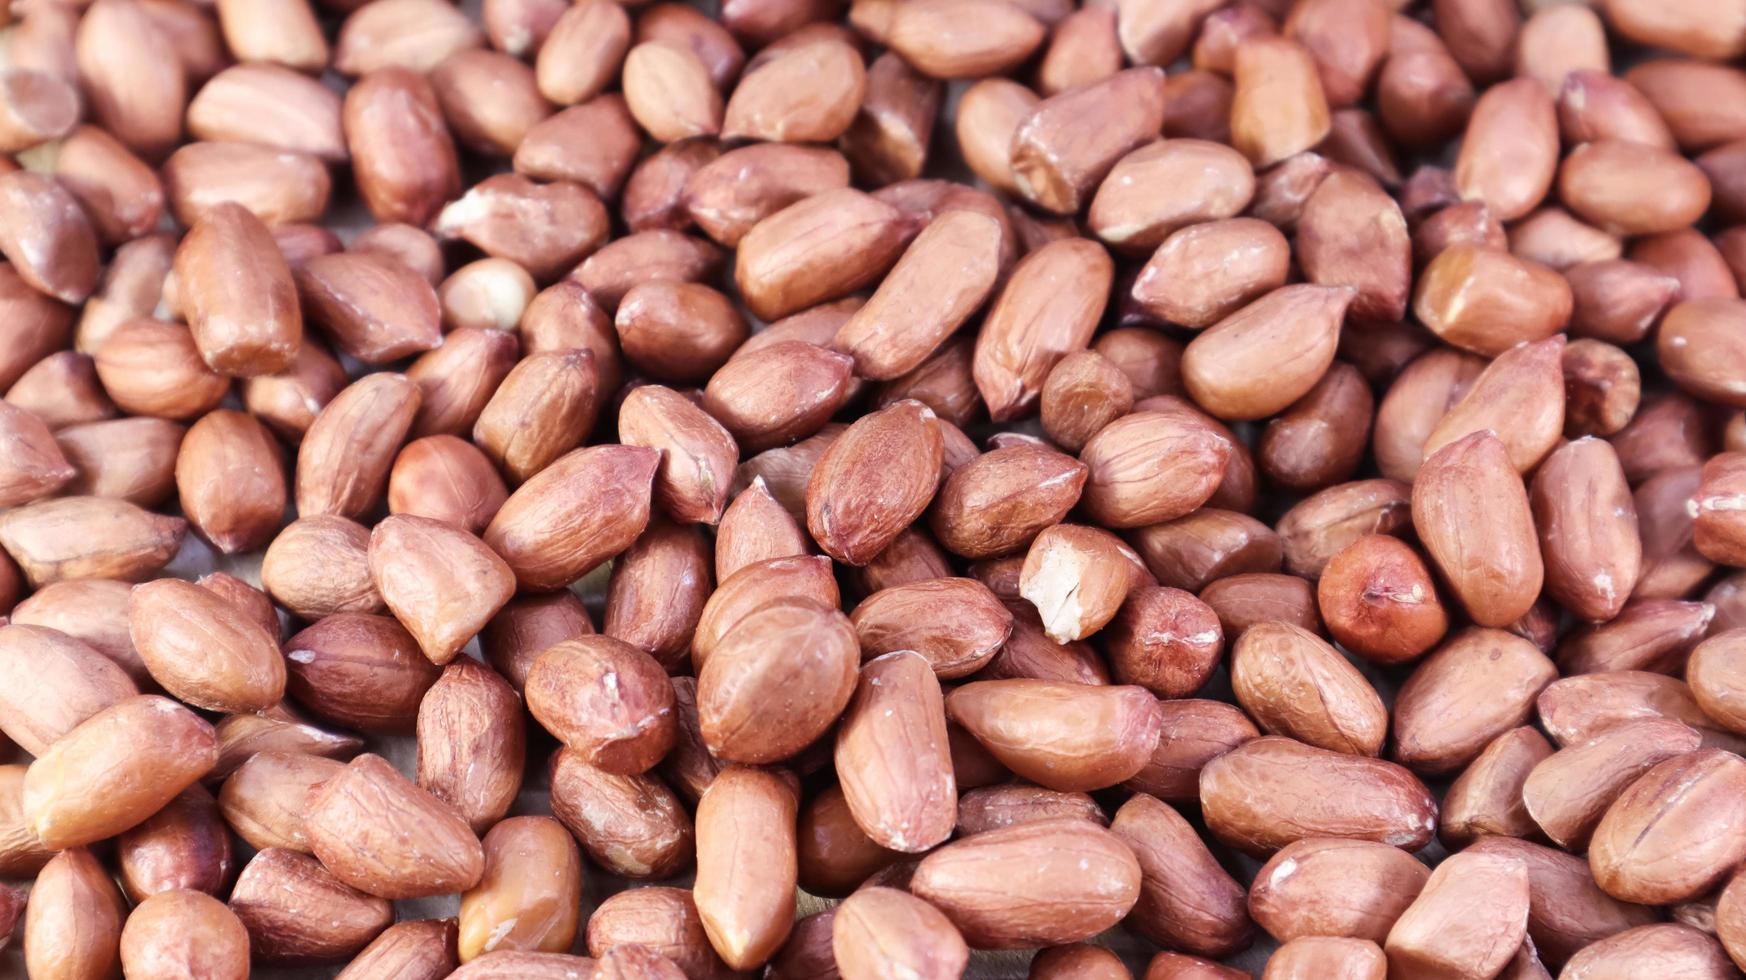 Heap of raw peanuts. Cultivated peanuts, underground or groundnuts. Plant of the legume family. Agricultural crop on an industrial scale. South America is considered the birthplace of peanuts. photo